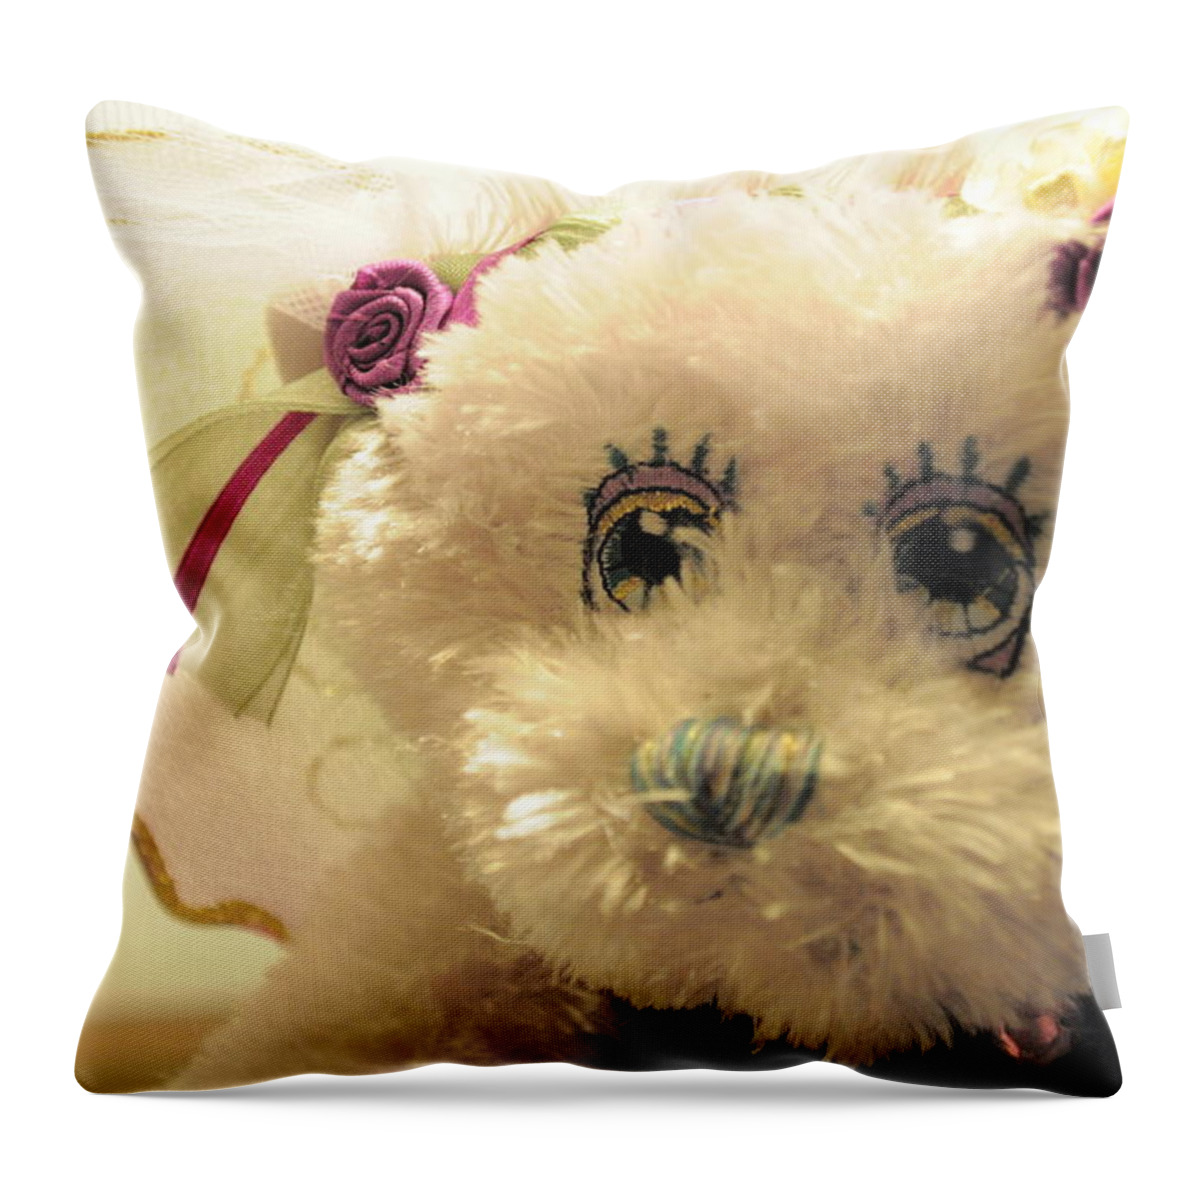 Amethyst Throw Pillow featuring the photograph Amethyst Fairy Bear by Bridgette Gomes